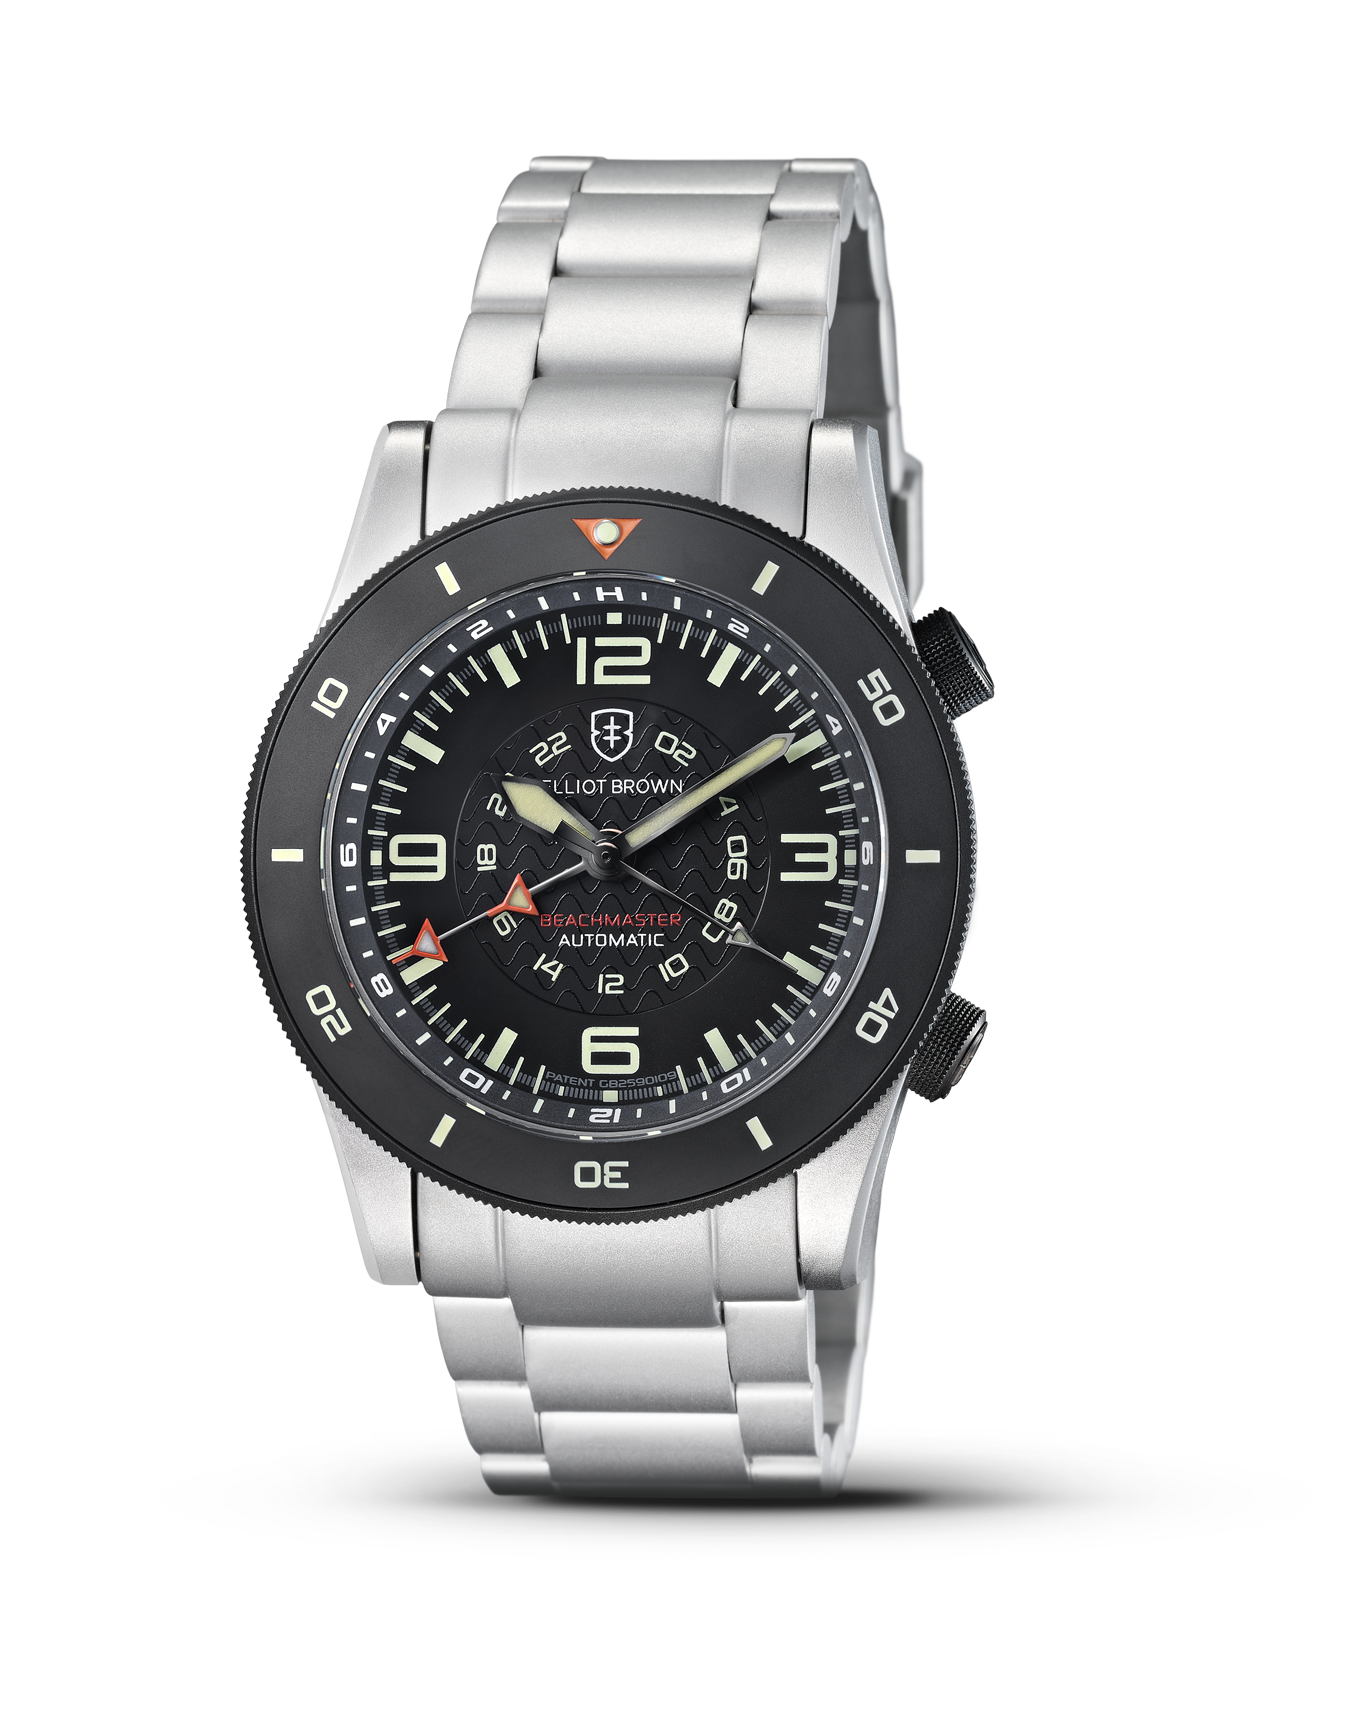 BEACHMASTER AUTOMATIC: Founder's edition: 0H0-A03-B06